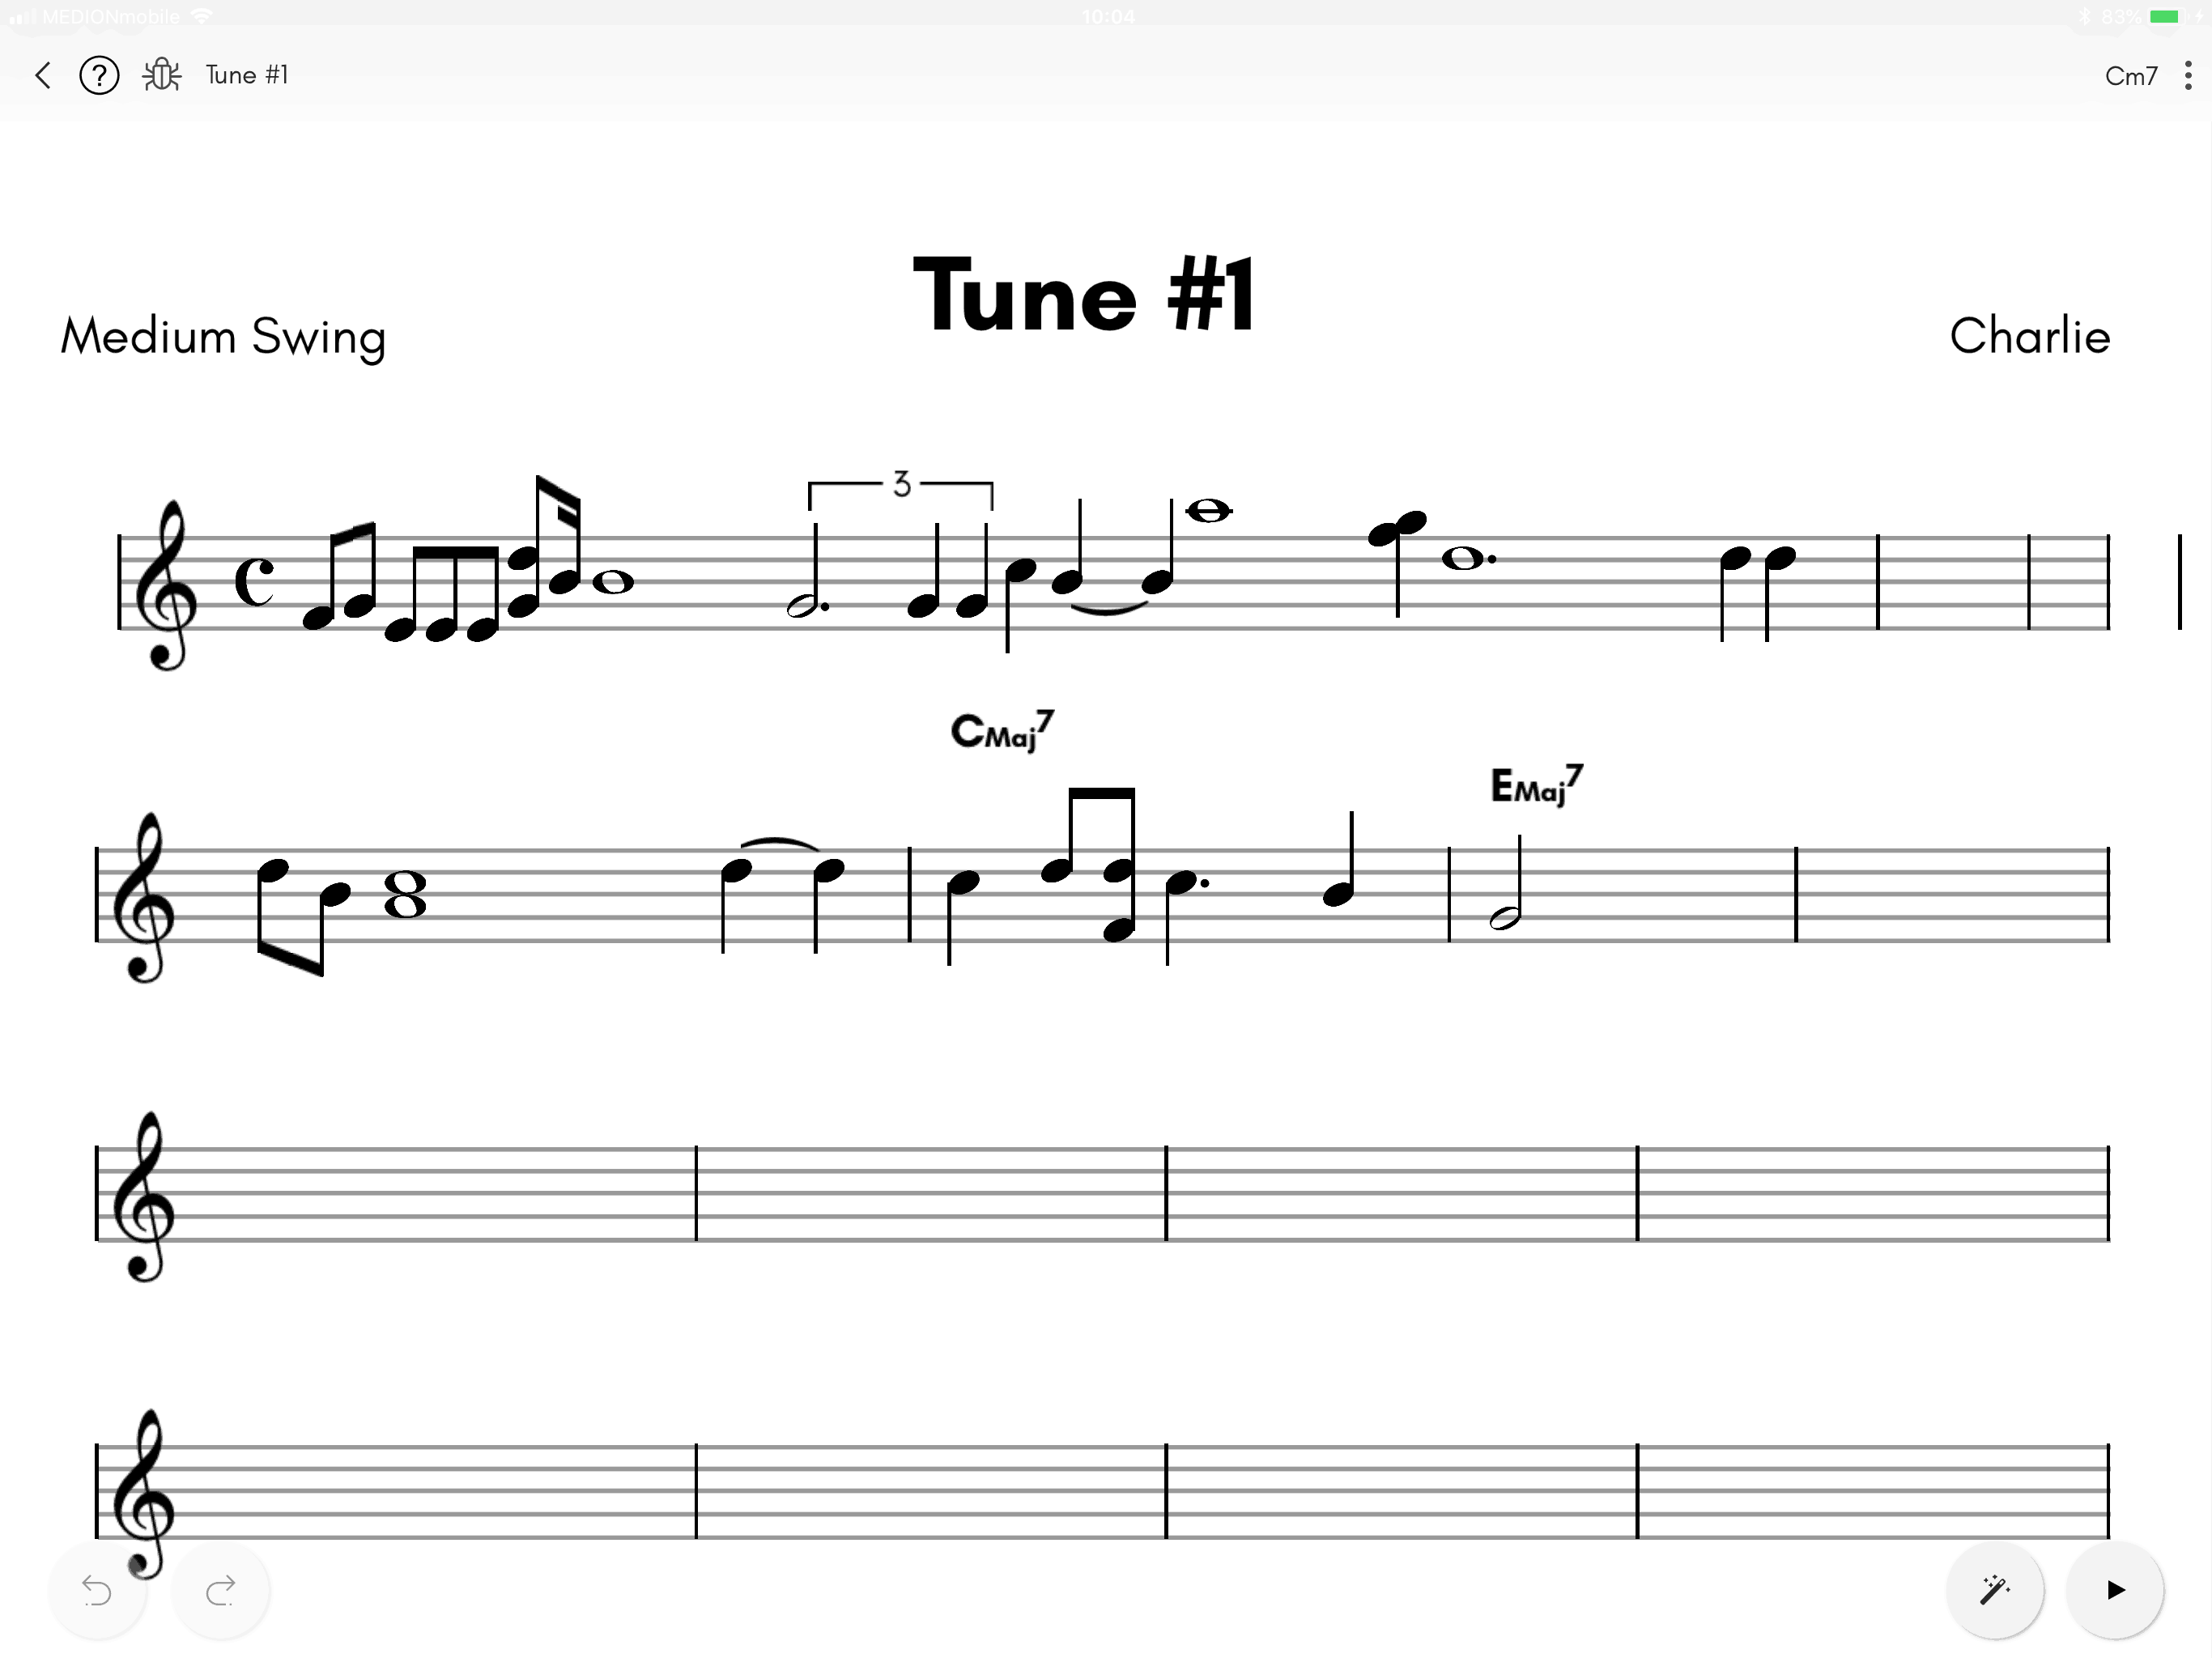 Don't attempt to play this 'tune.'